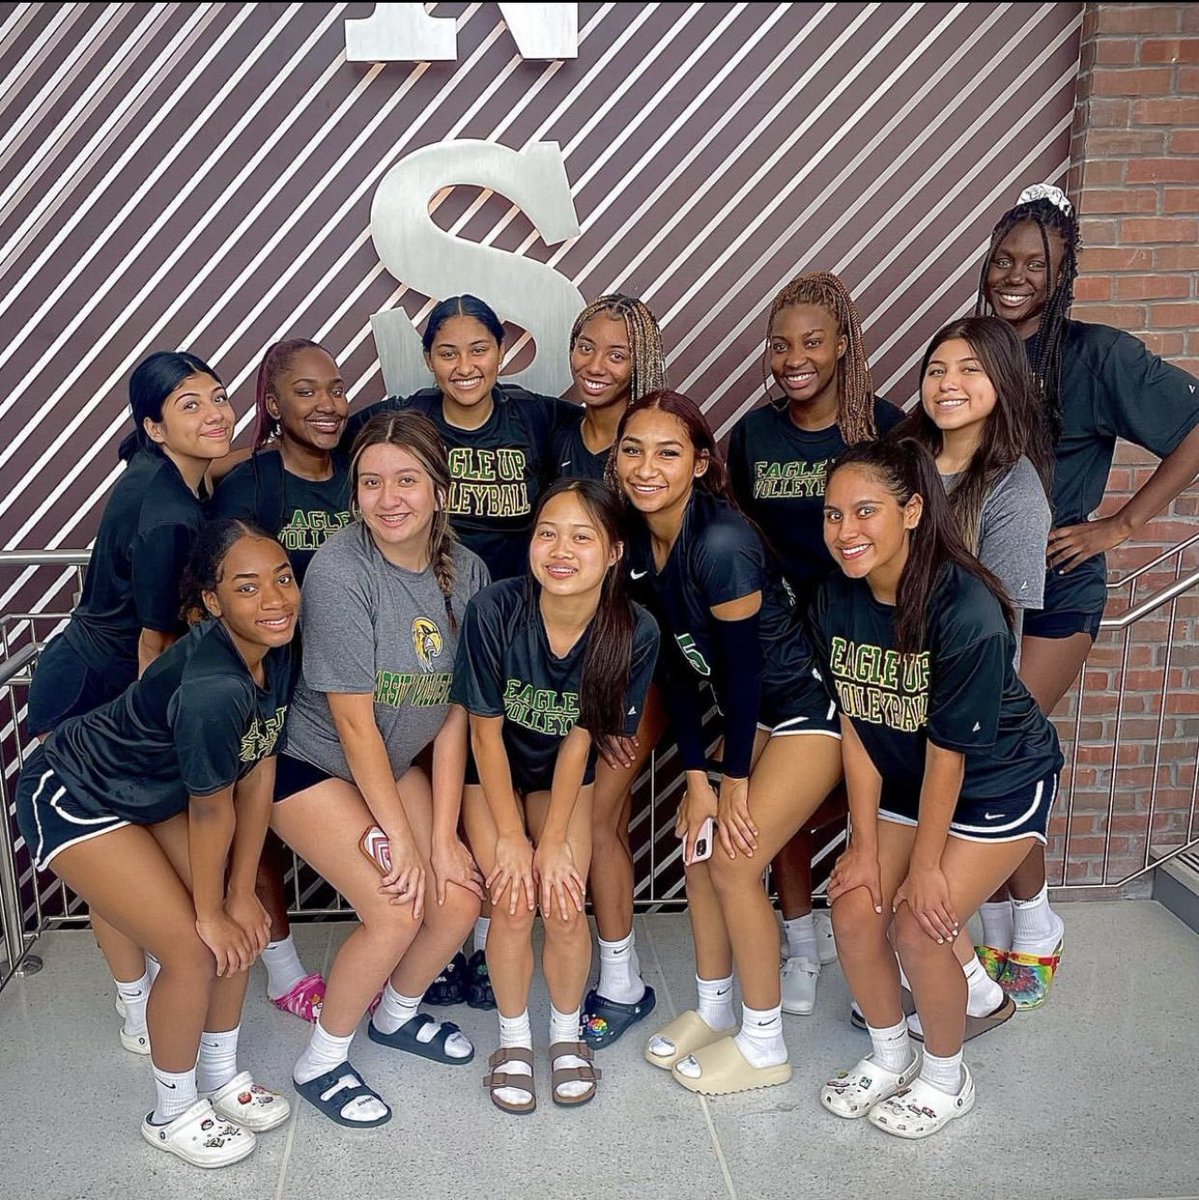 WOOP WOOP 🙌 Our Lady Eagles Varsity volleyball team finished 2-1 in the Landers Invitational tournament. Wish them luck as they head into day 3 tomorrow!!!! #EagleUp 💚💛🥳💚💛